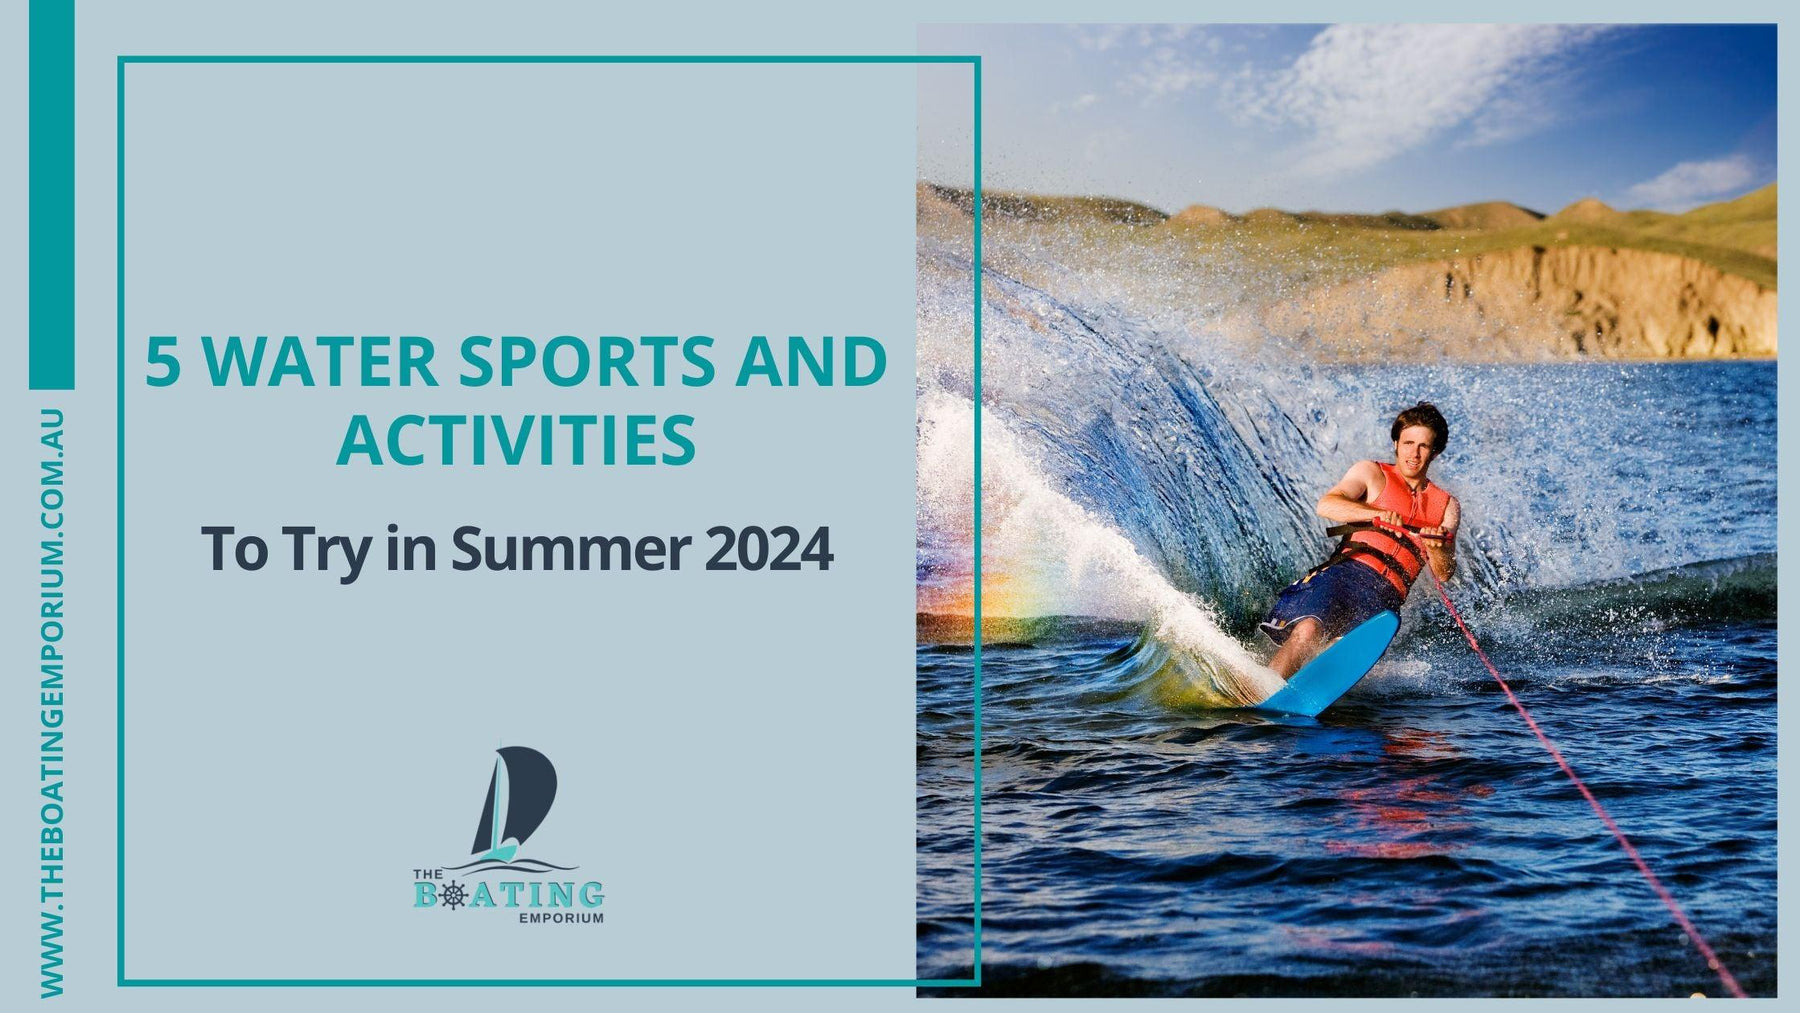 5 Water Sports and Activities to Try in Summer 2024 - The Boating Emporium